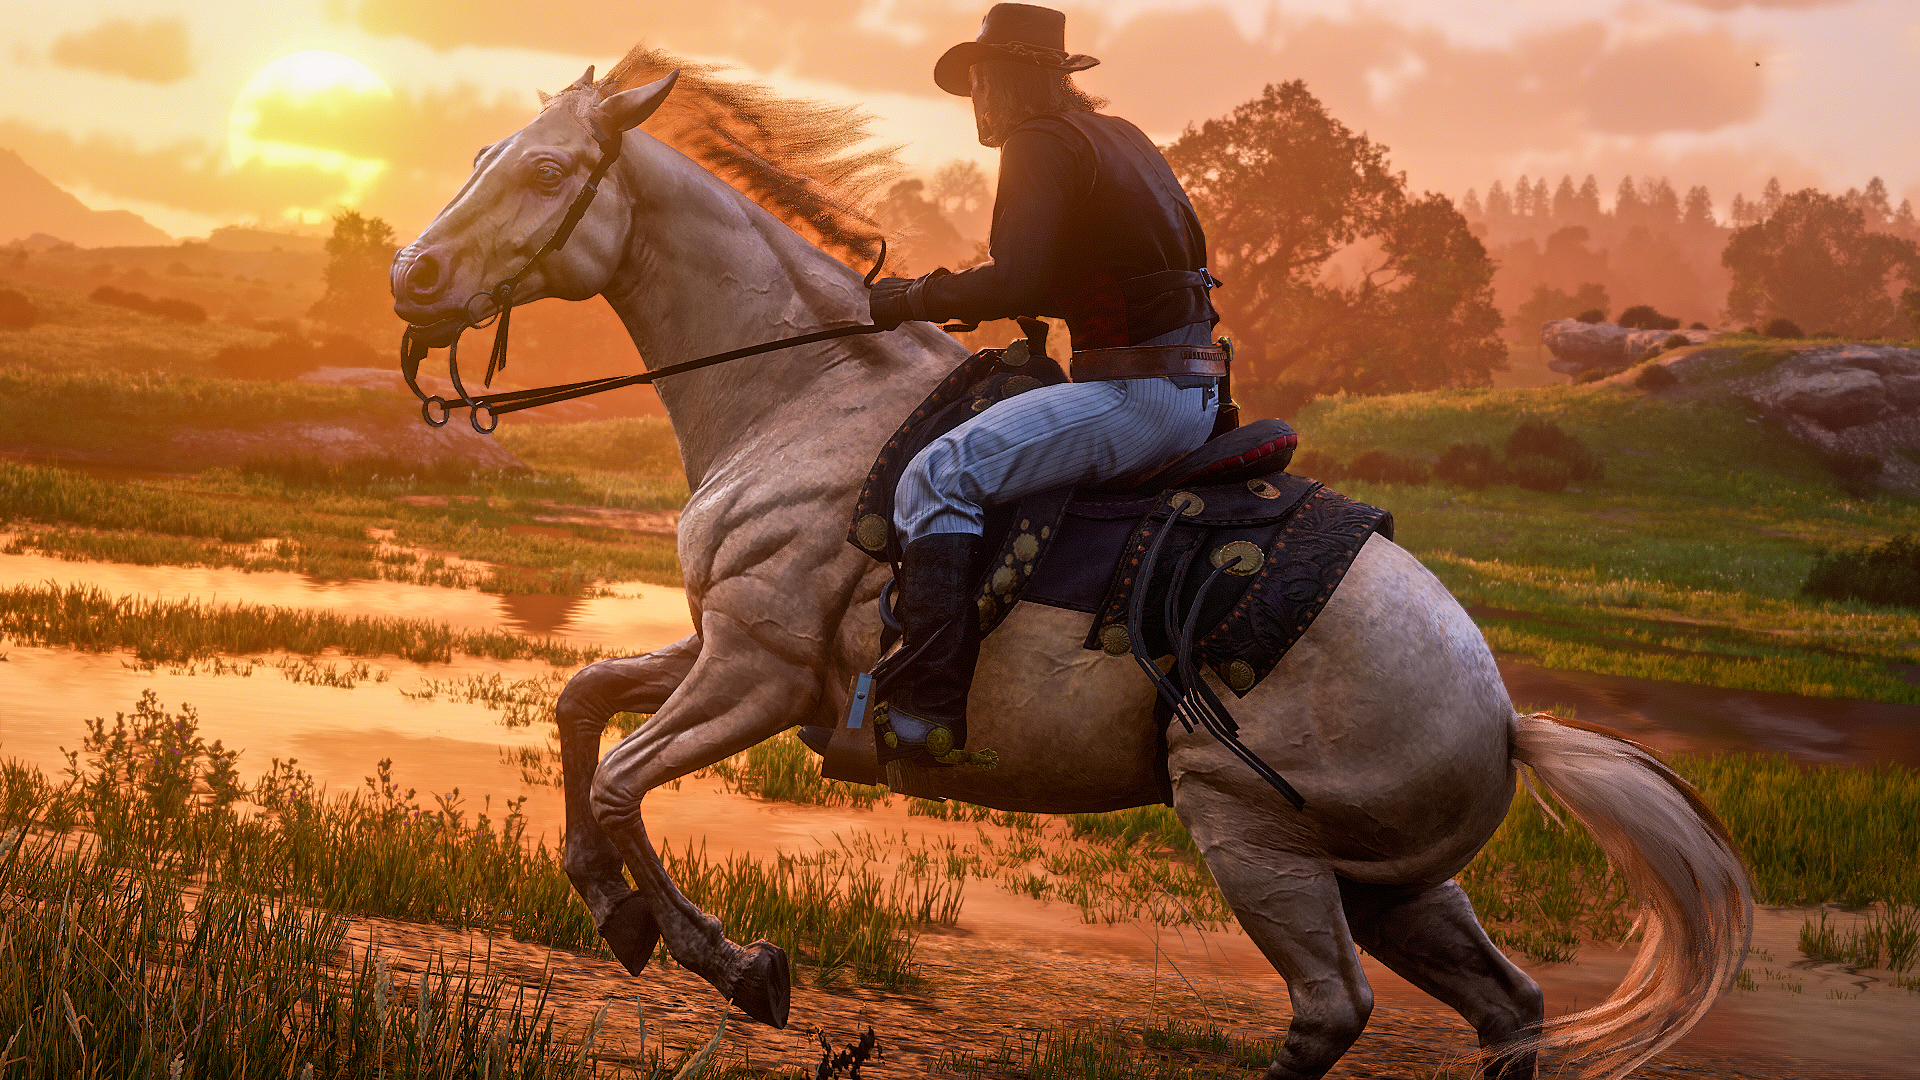 Red Dead Redemption 2 Screen Shot Water Horse Riding Horseback Video Game Characters Arthur Morgan S 1920x1080